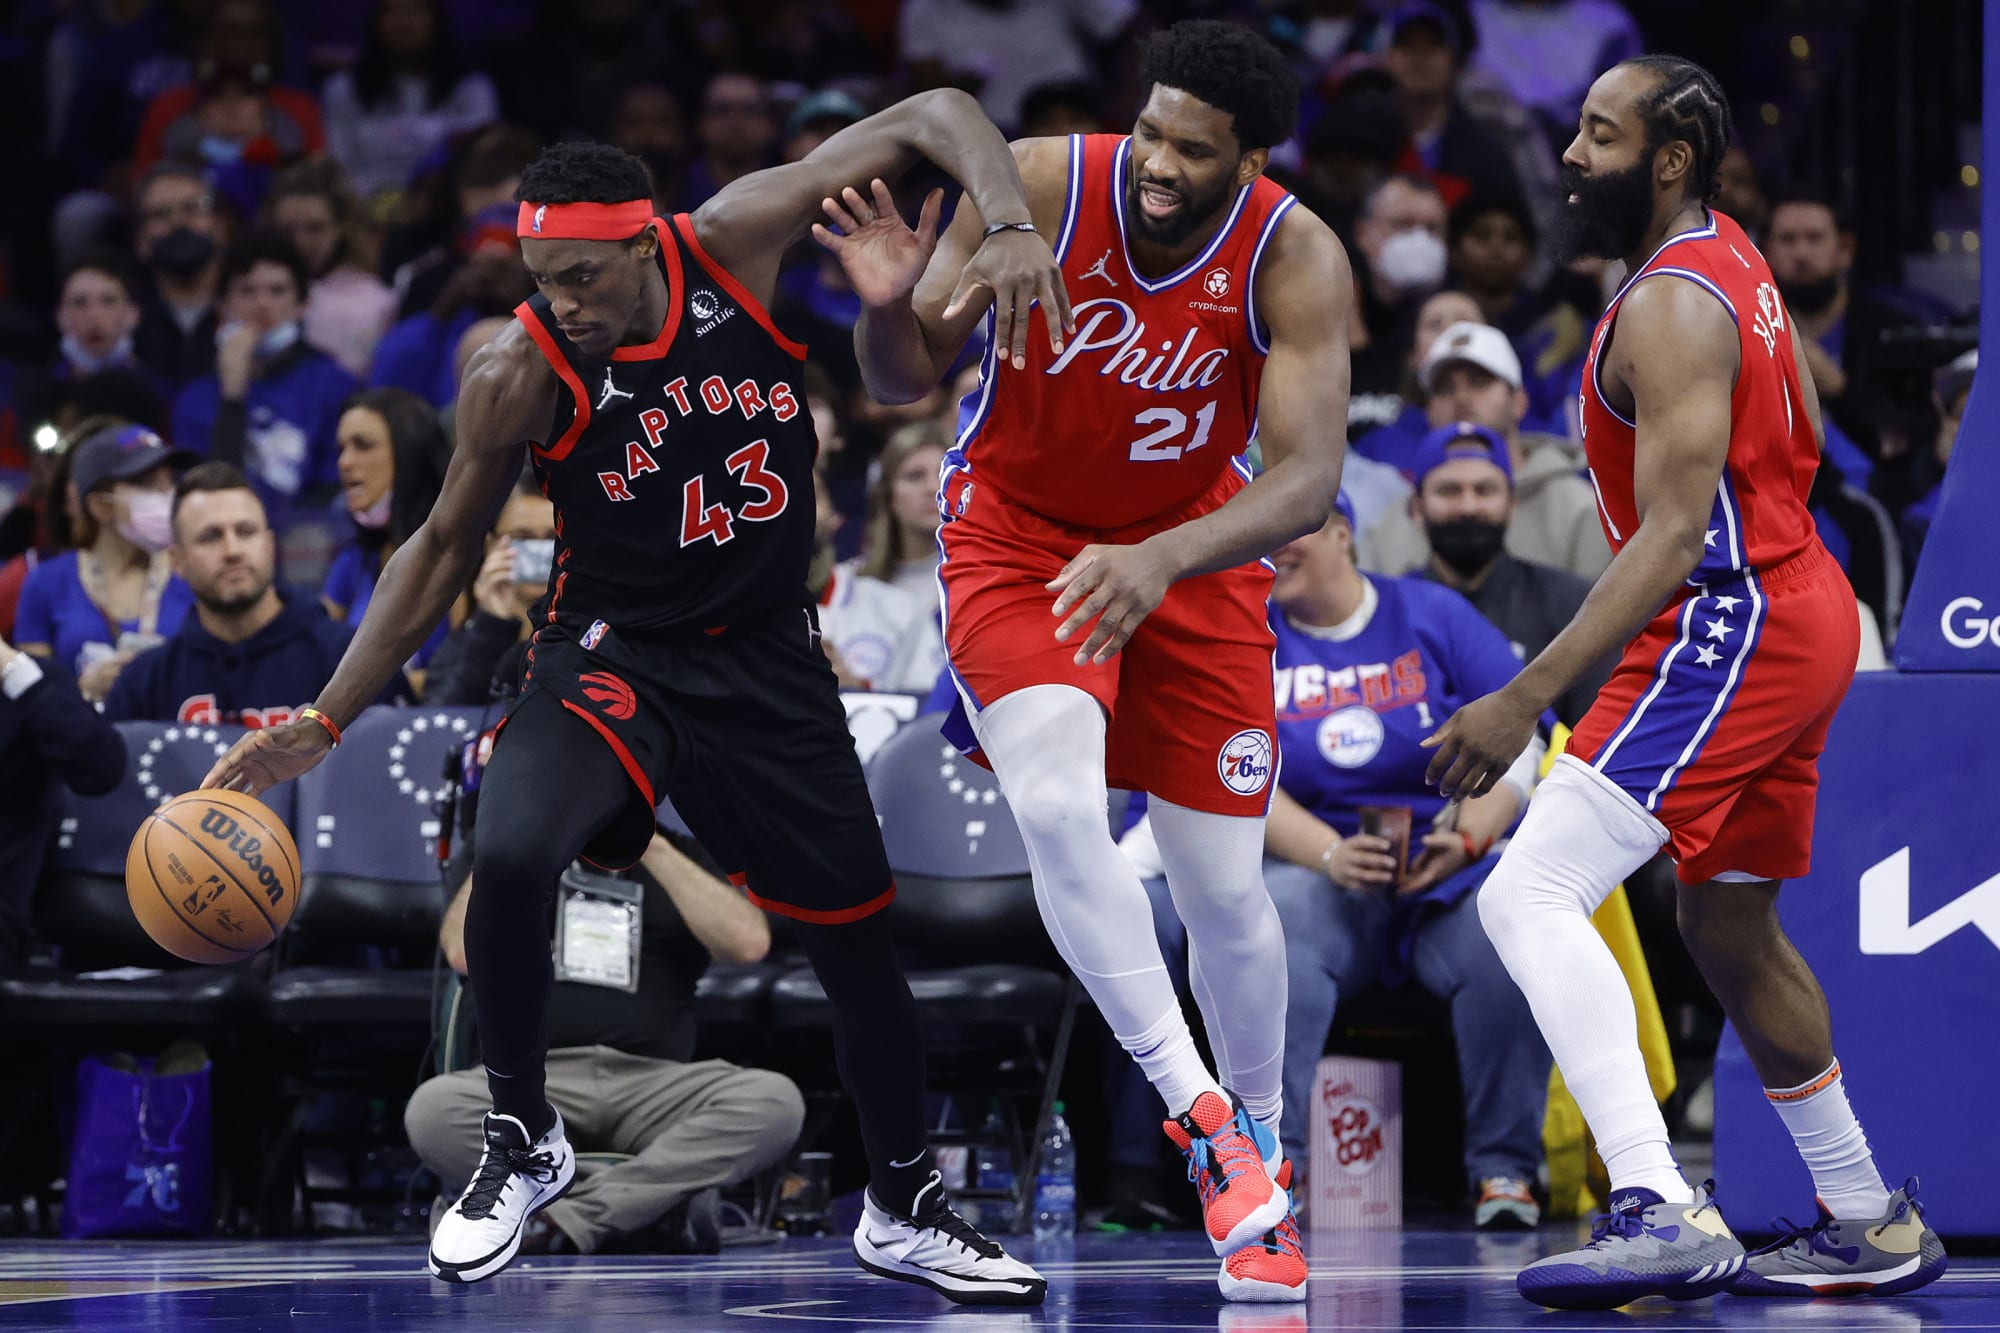 Raptors: Pascal Siakam calls out Joel Embiid’s “fake toughness”